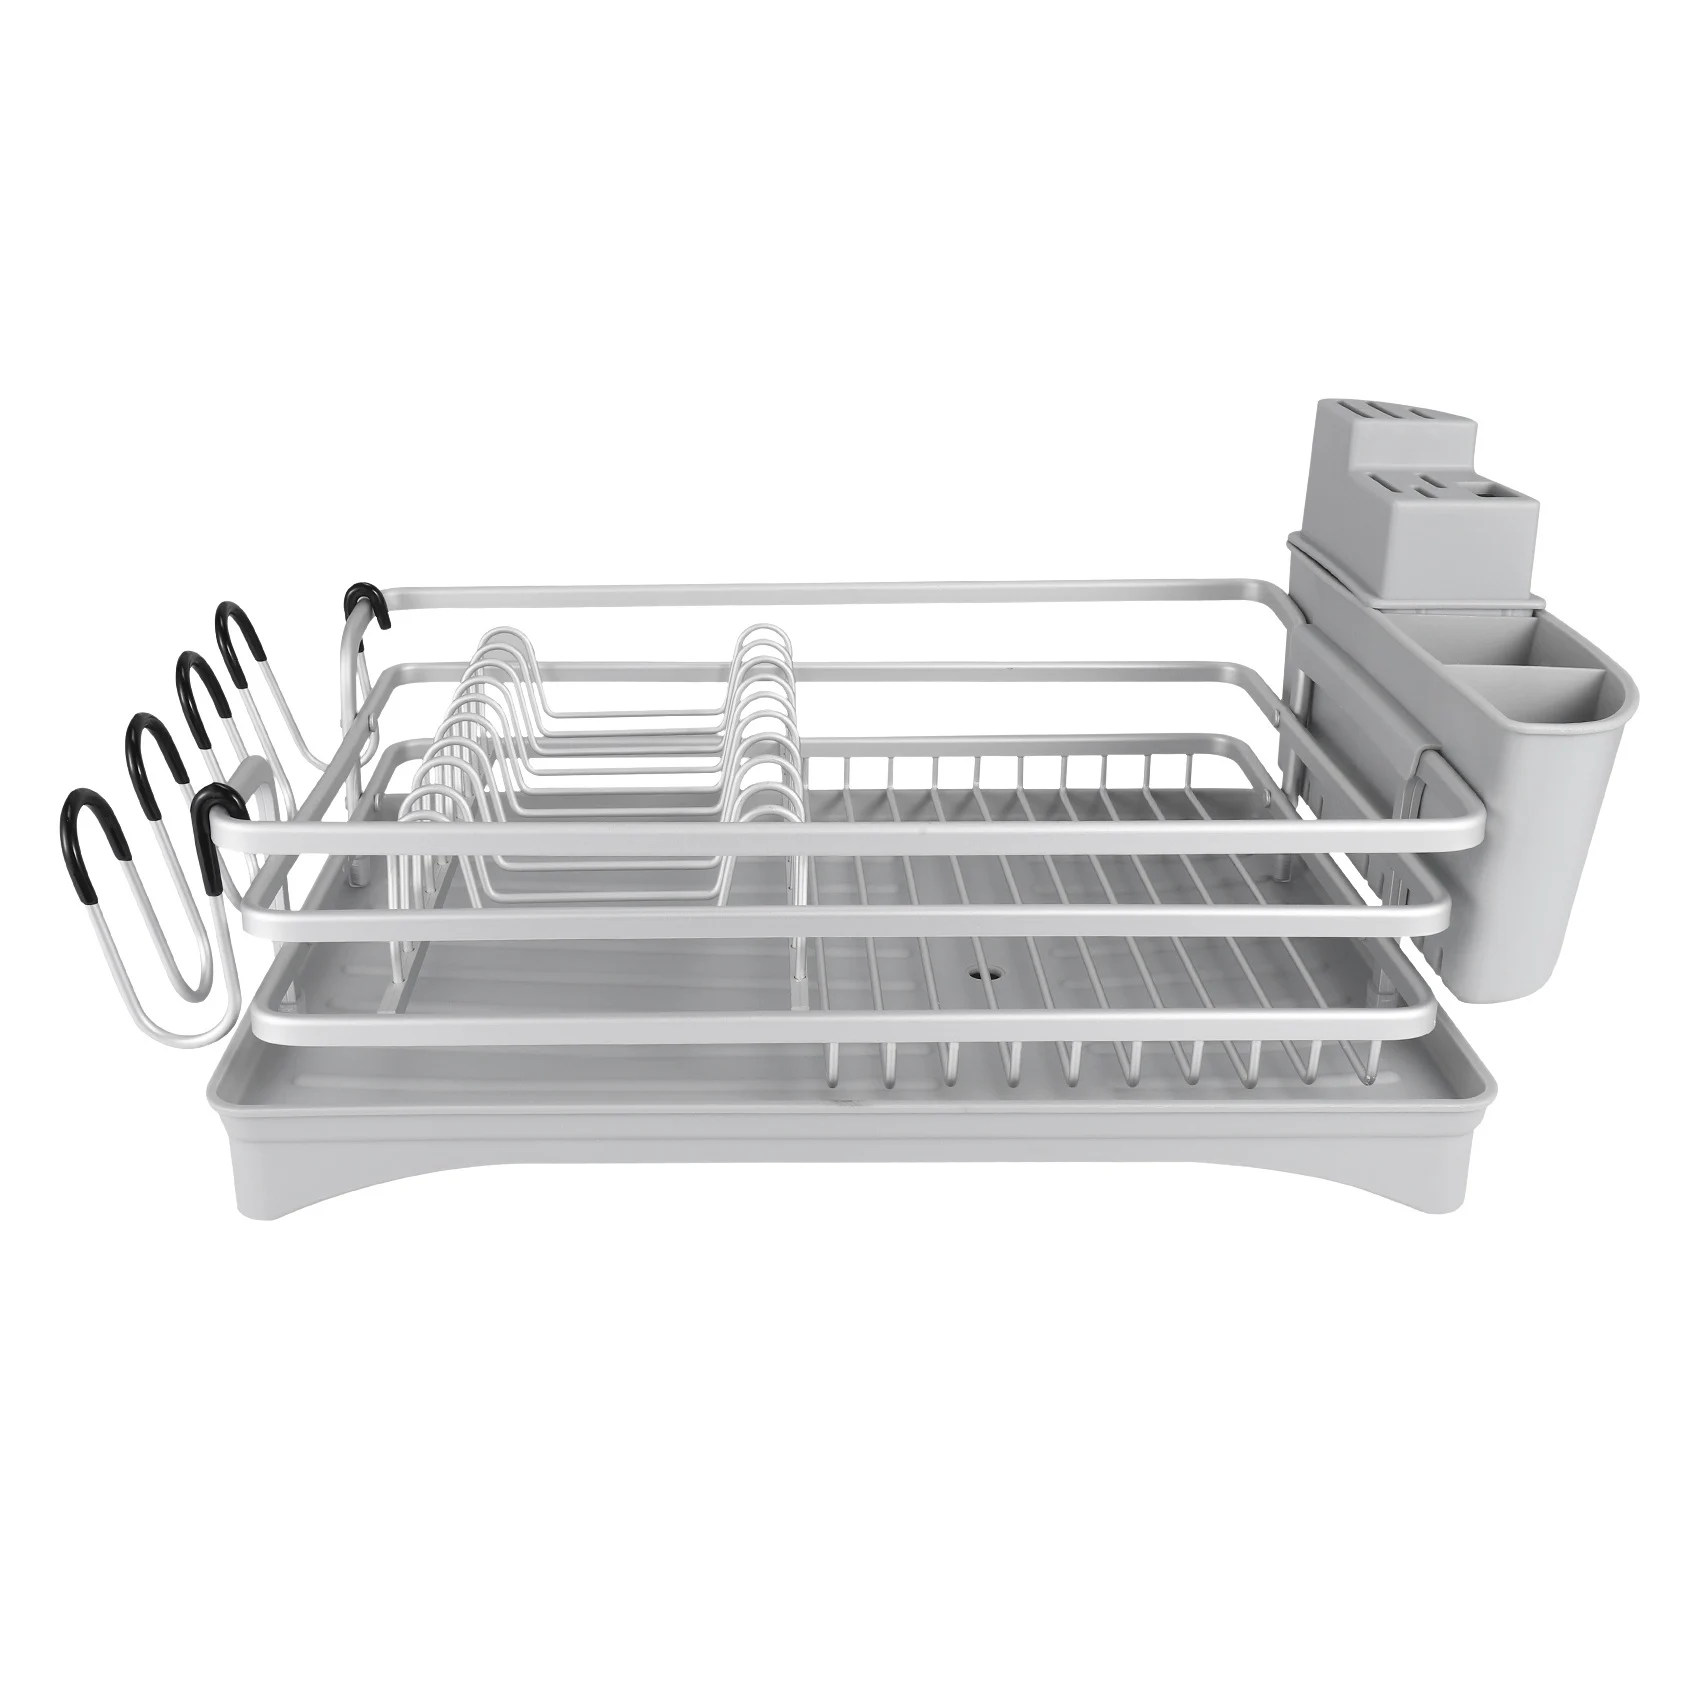 

Dish Drying Rack, Compact Rustproof Dish Rack and Drainboard Set, Dish Drainer with Adjustable Swivel Spout Gray